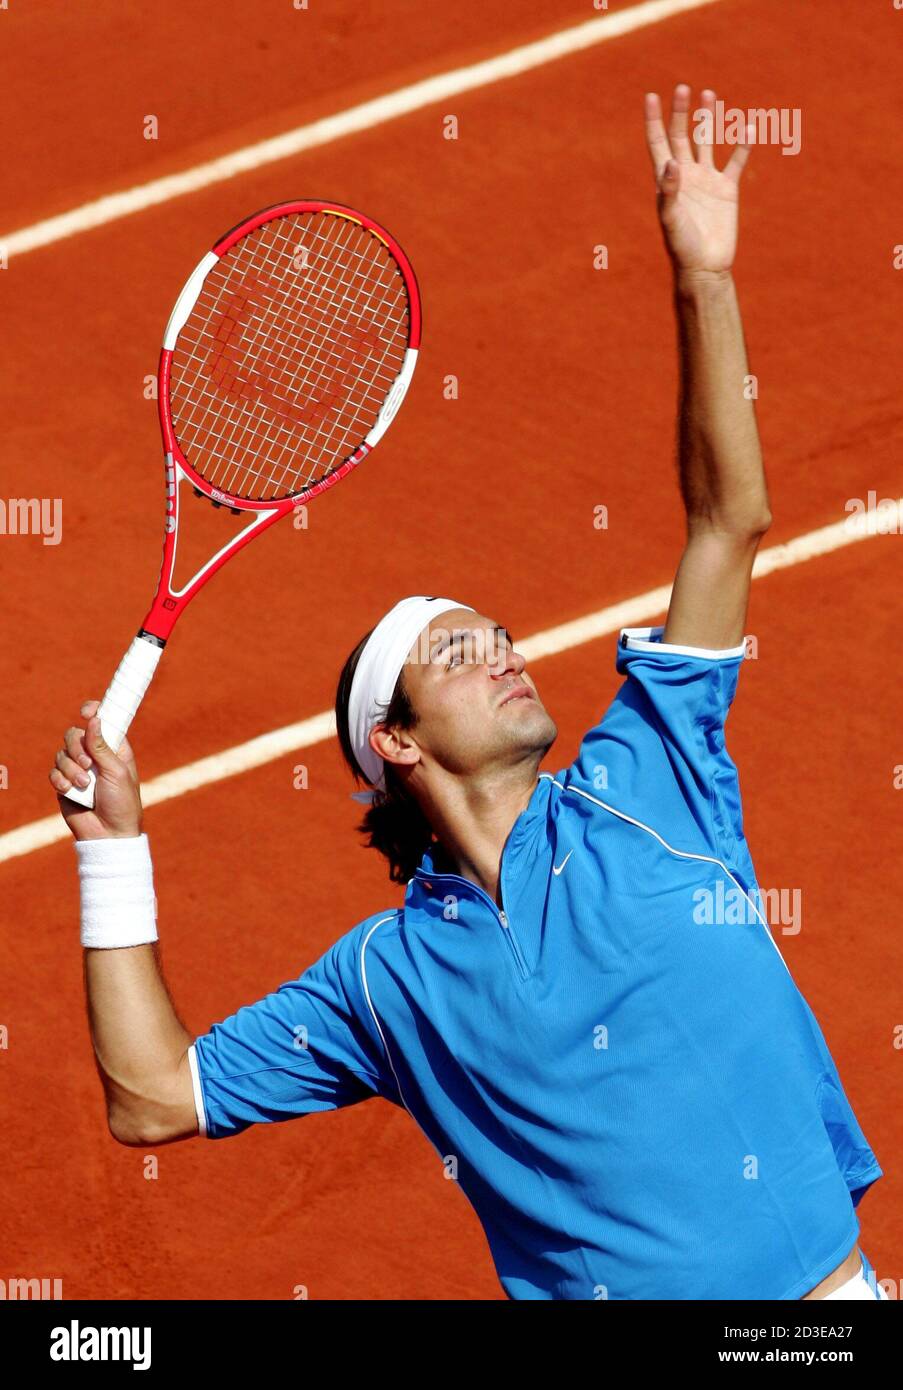 Roger Federer of Switzerland serves during his match against Kristof  Vliegen of Belgium in the first round of the French Open tennis tournament  at Roland Garros stadium in Paris, May 25, 2004.